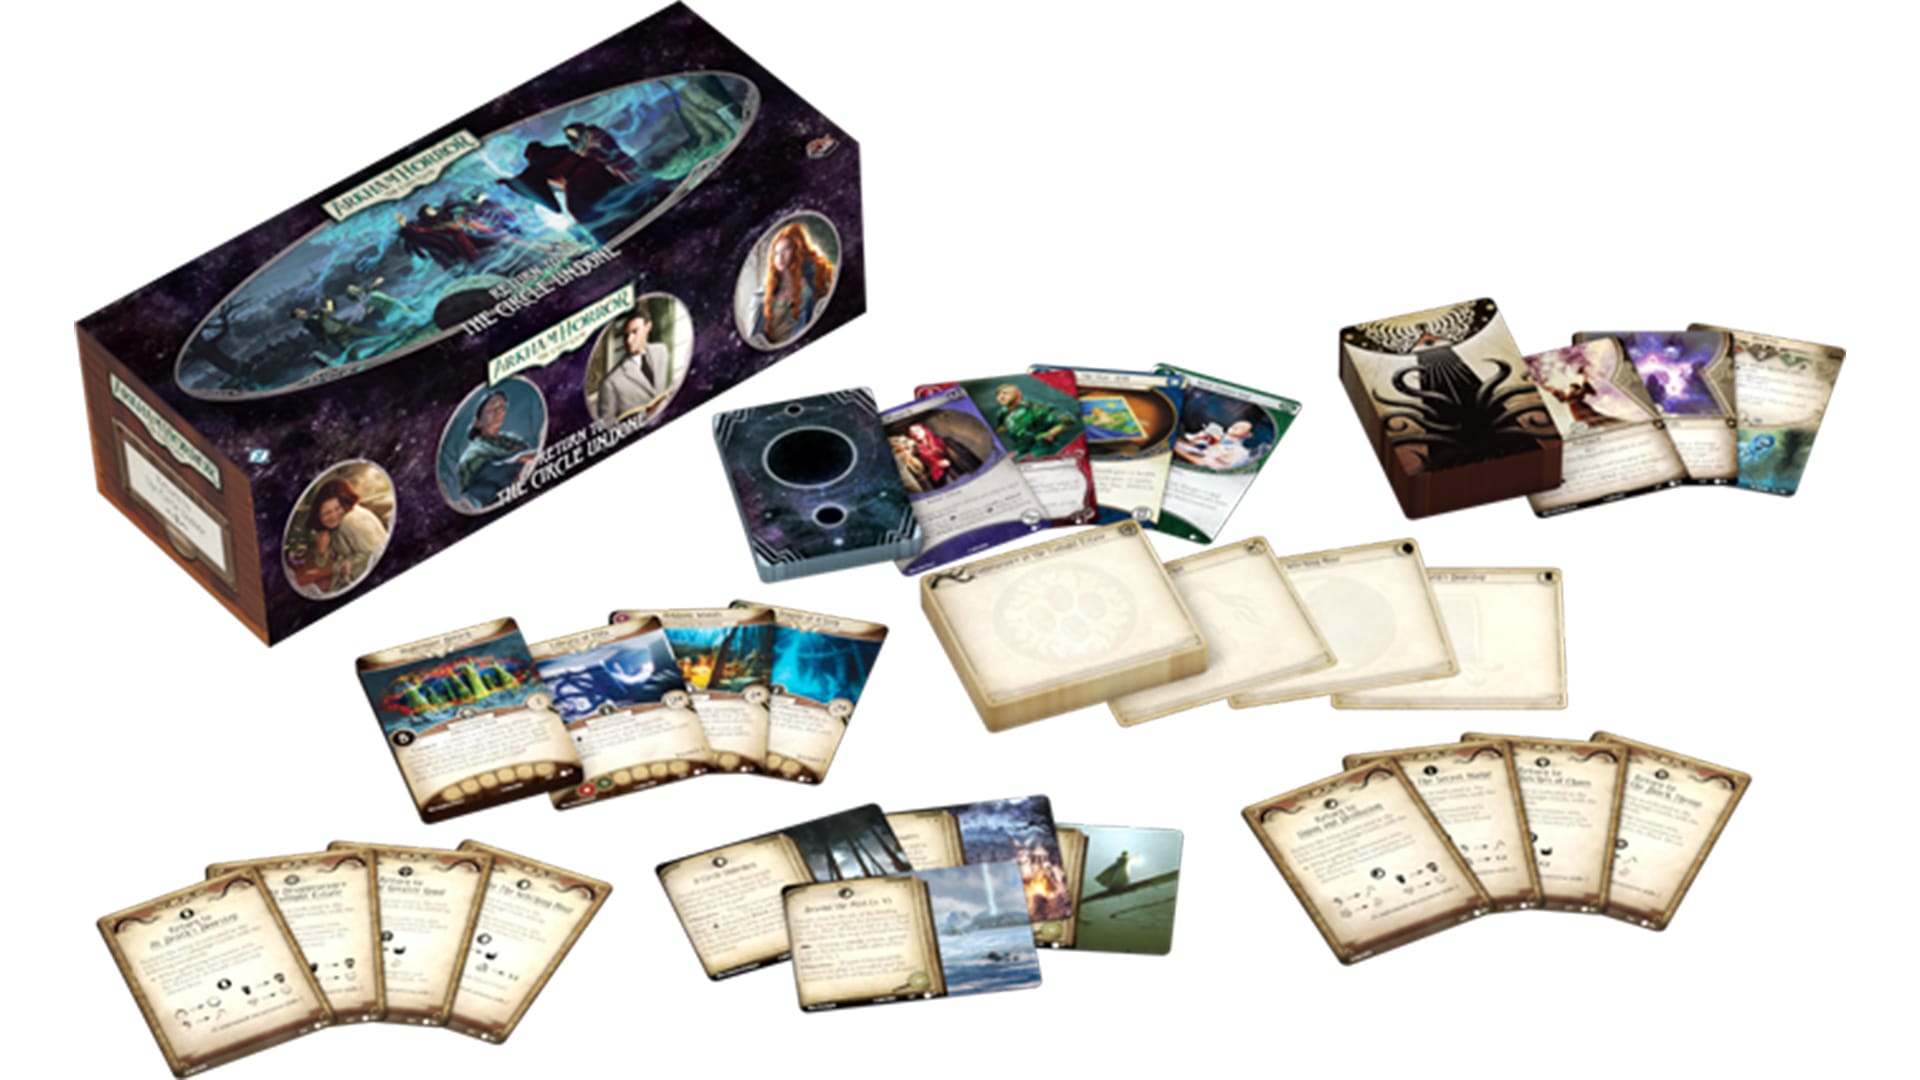 Return To The Circle Undone - Box Contents